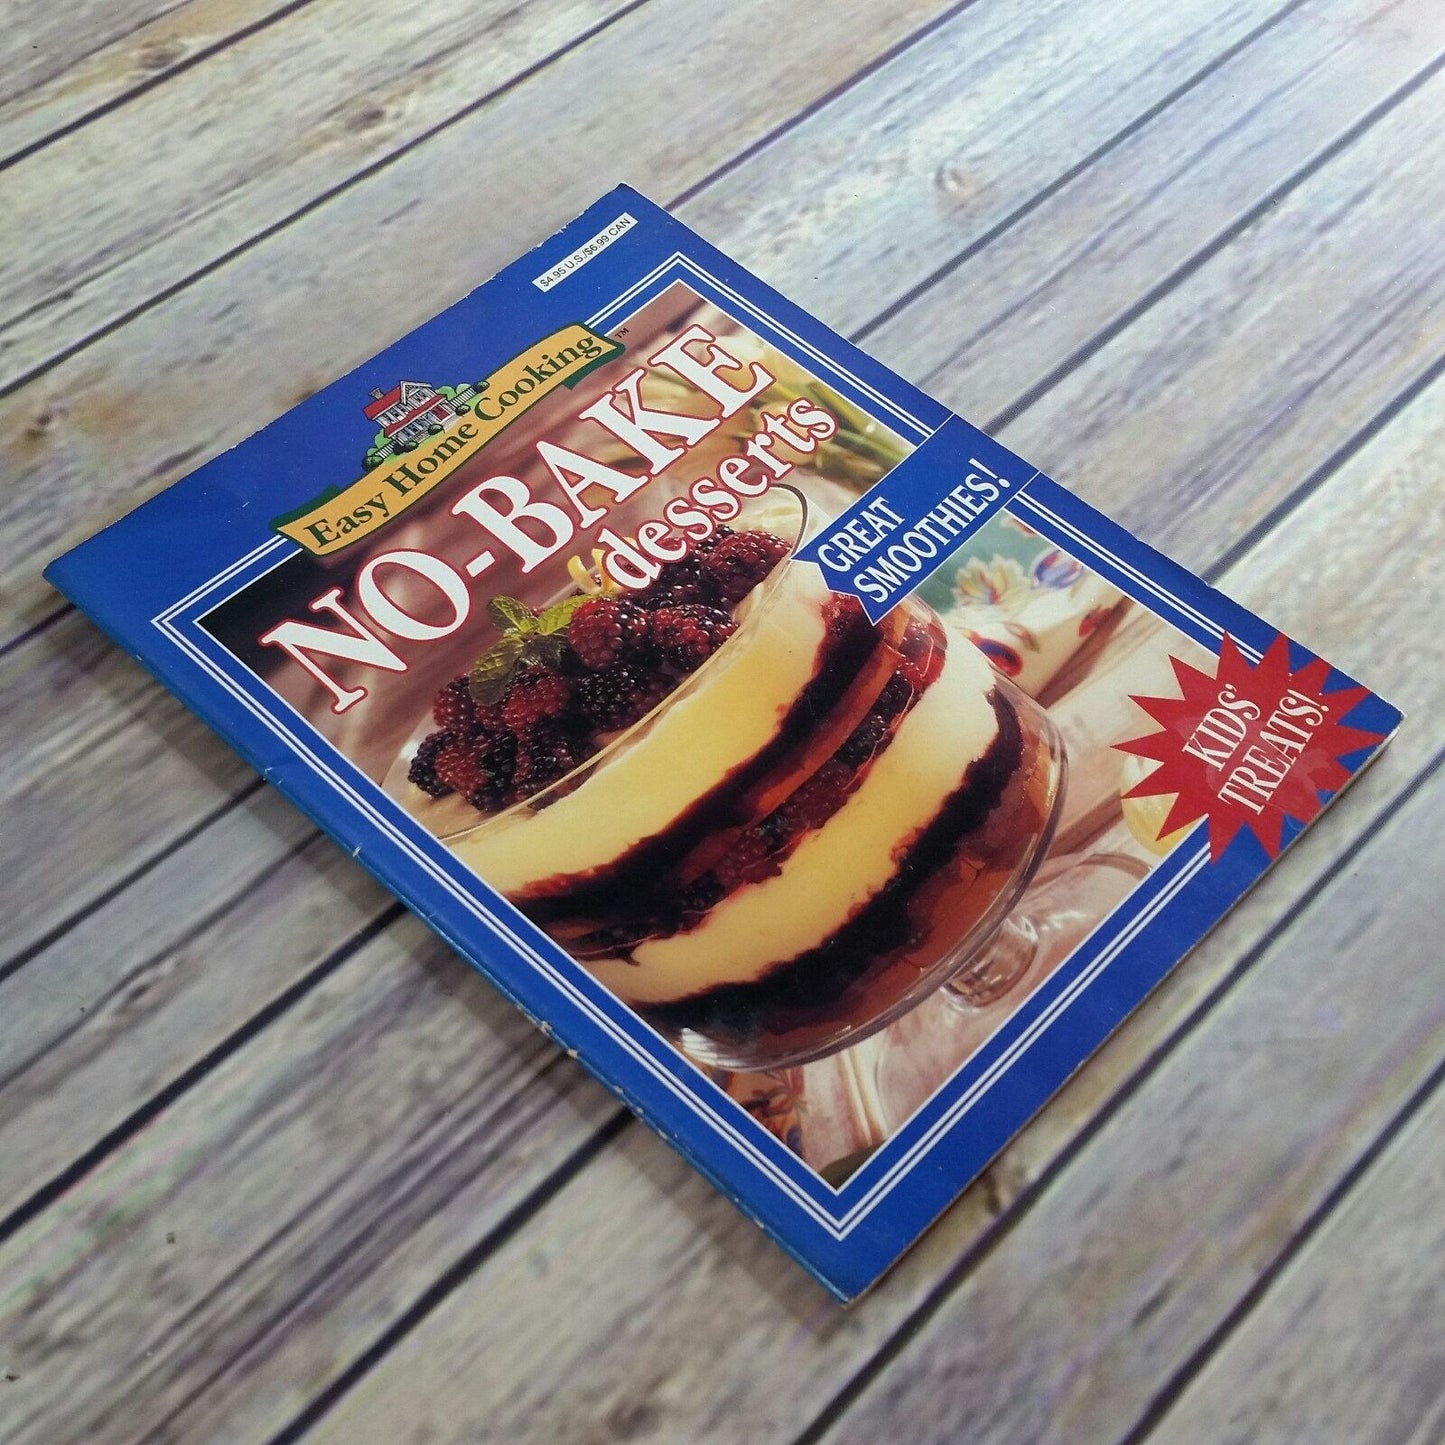 Vintage Cookbook No Bake Desserts Recipes 1999 Paperback Easy Home Cooking Kids Treats Great Smoothies Publications International